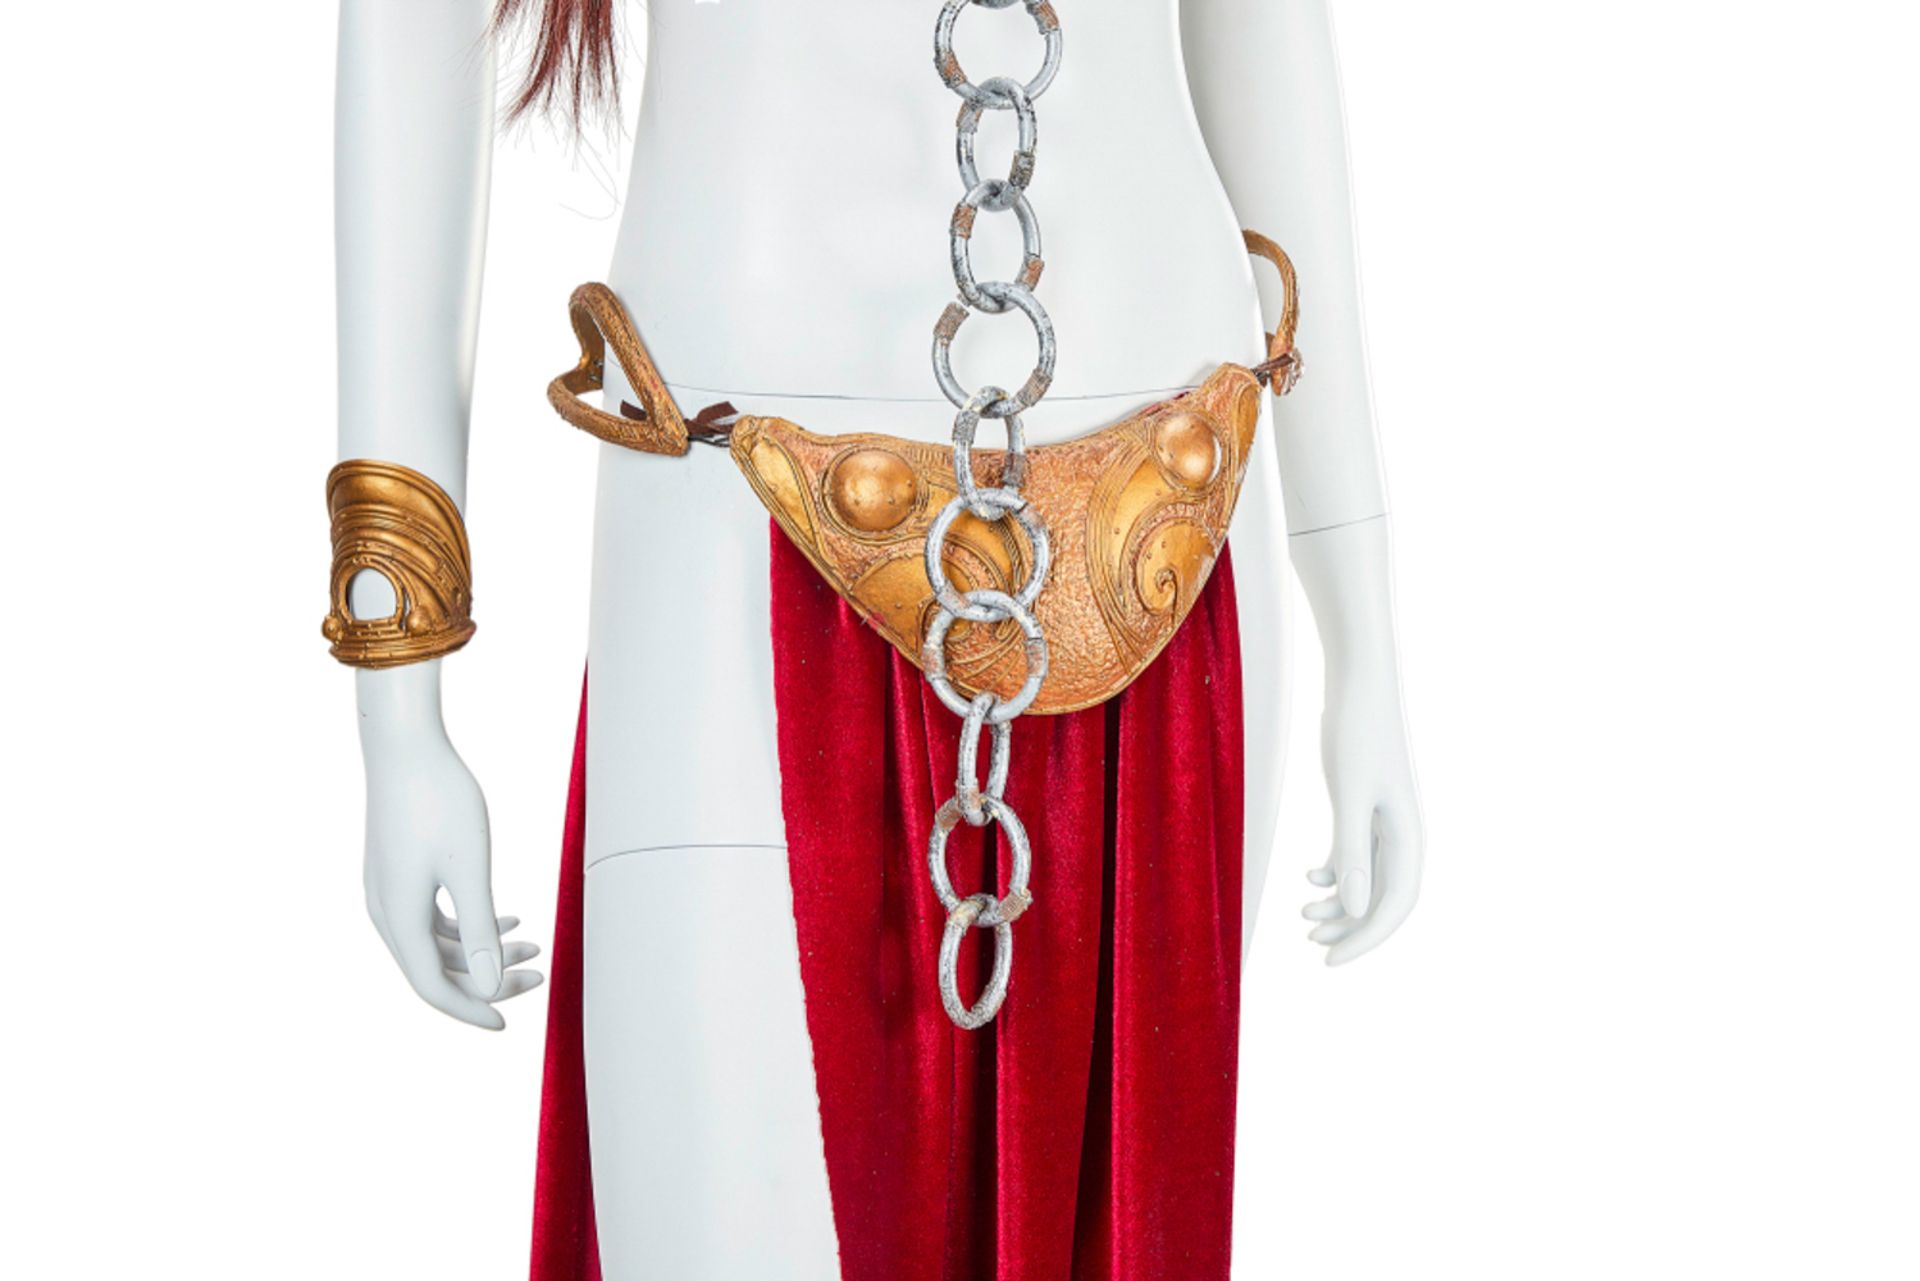 STAR WARS - RETURN OF THE JEDI | CARRIE FISHER "PRINCESS LEIA ORGANA" JABBA THE HUTT SLAVE COSTUME P - Image 11 of 54